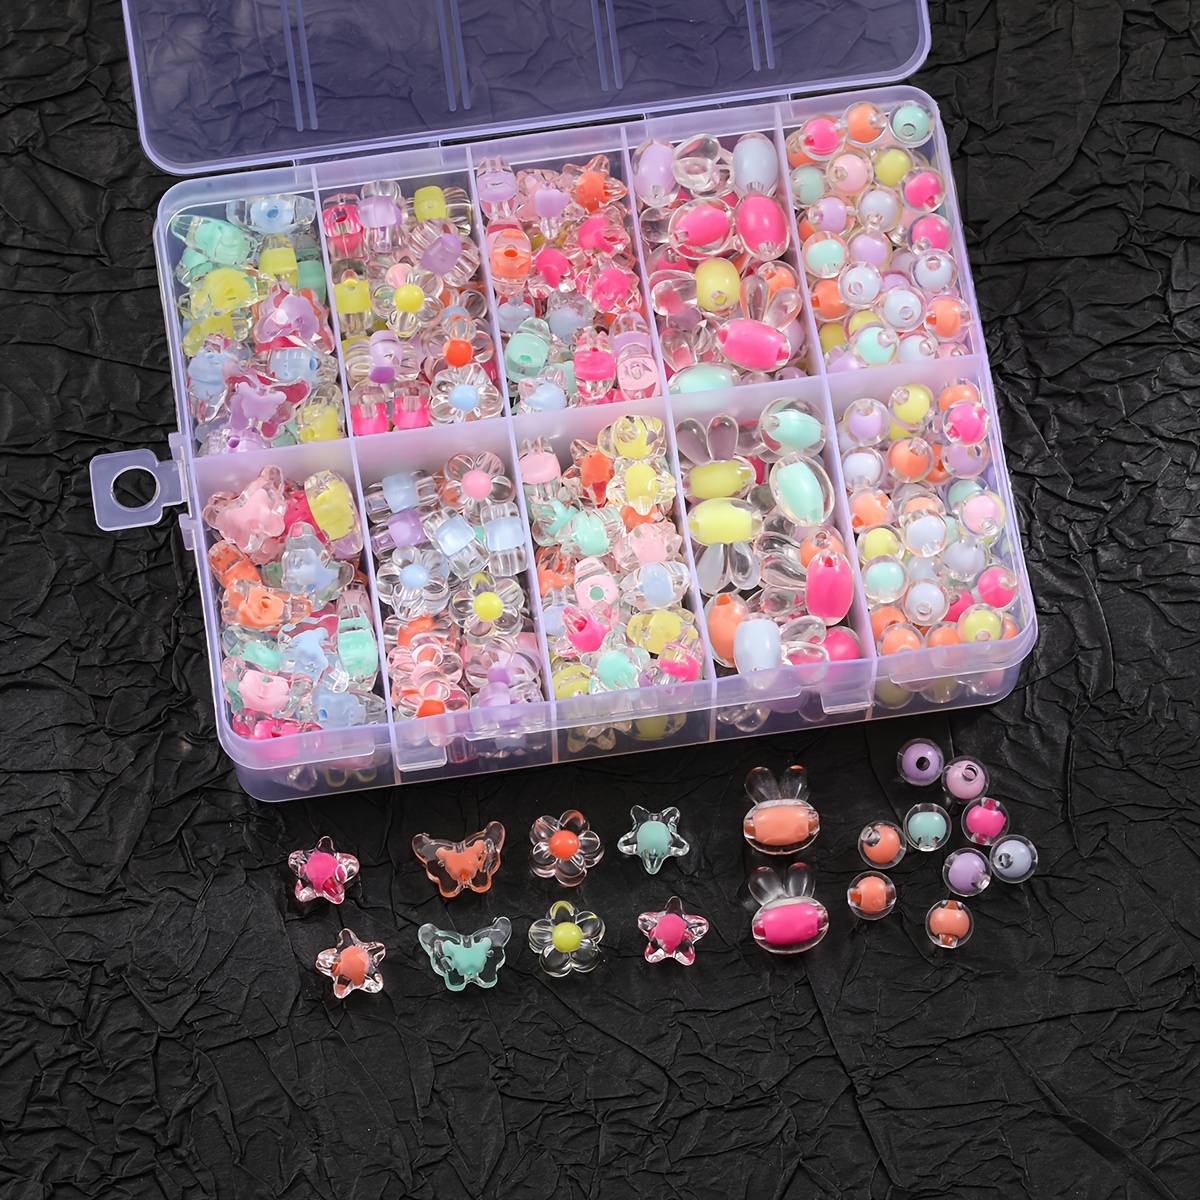 

About 400pcs Colorful Transparent Mixed Butterfly Flower Star Rabbit Round Beads For Diy Bracelet Necklace Mobile Phone Chain Keychain Making Accessories